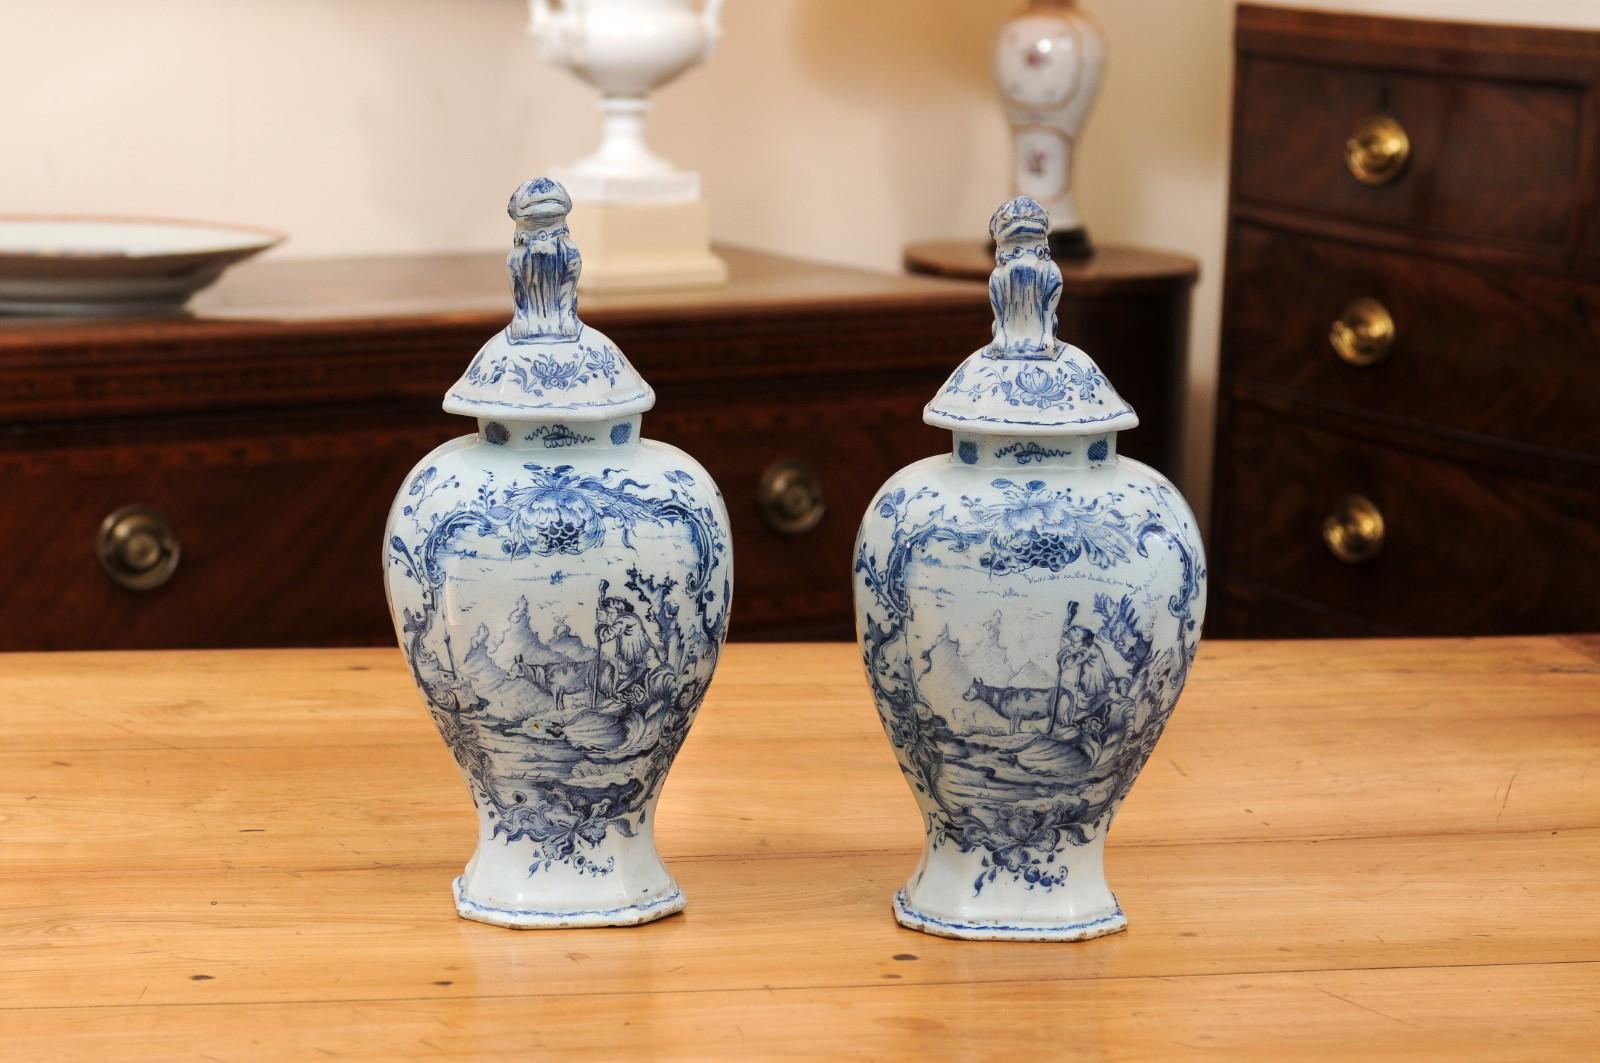 Pair of Late 18th Century Italian Porcelain Garniture Urns with Lids For Sale 5